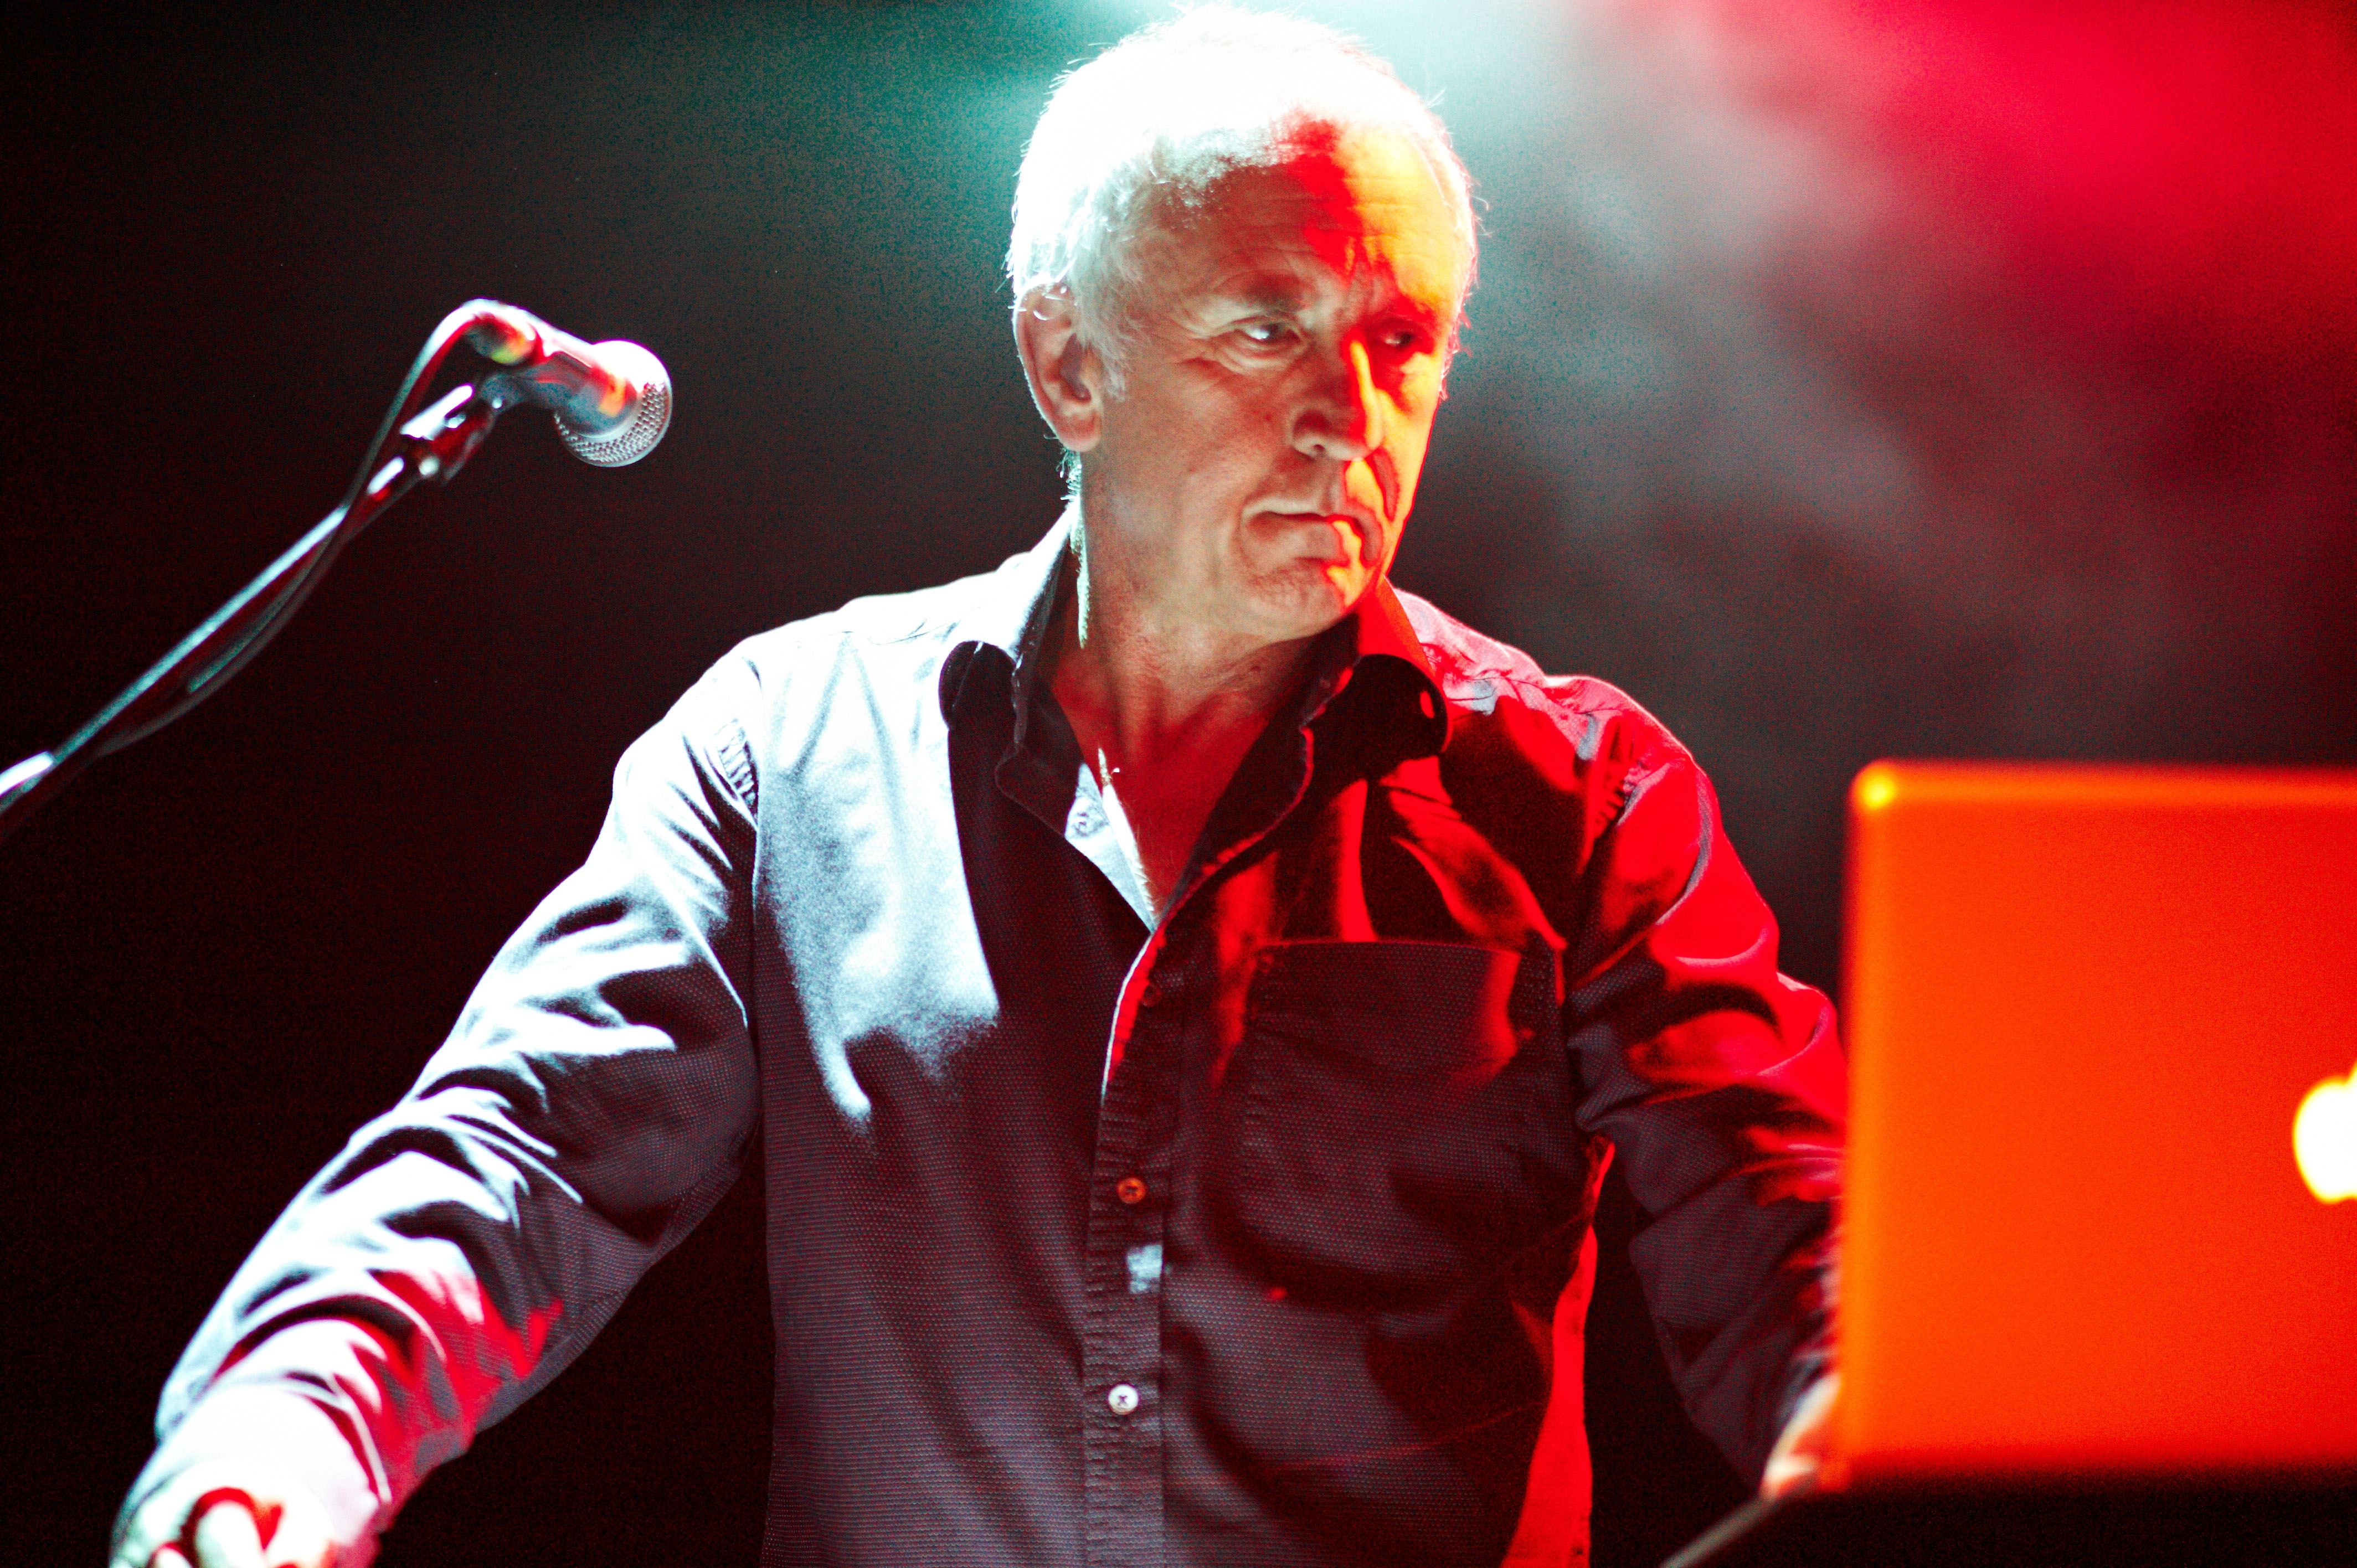 Chris Cross was one of the driving forces behind Ultravox